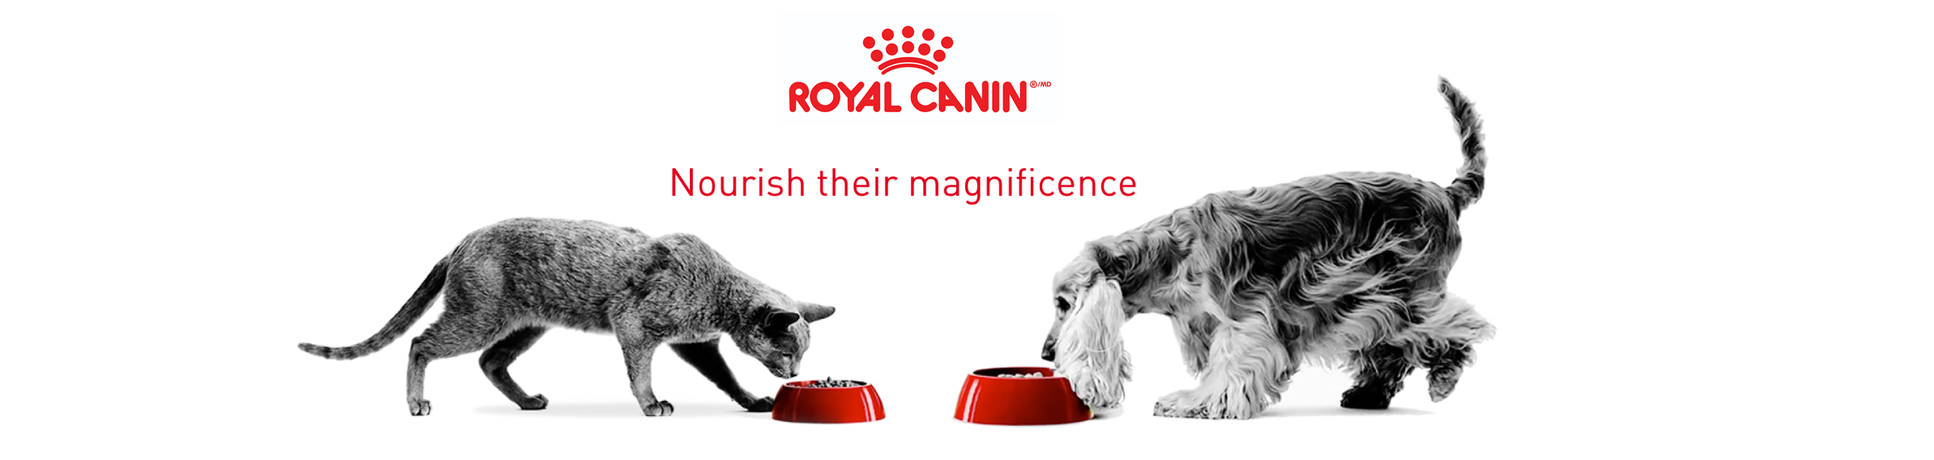 Royal Canin Breed-Specific Wet Food